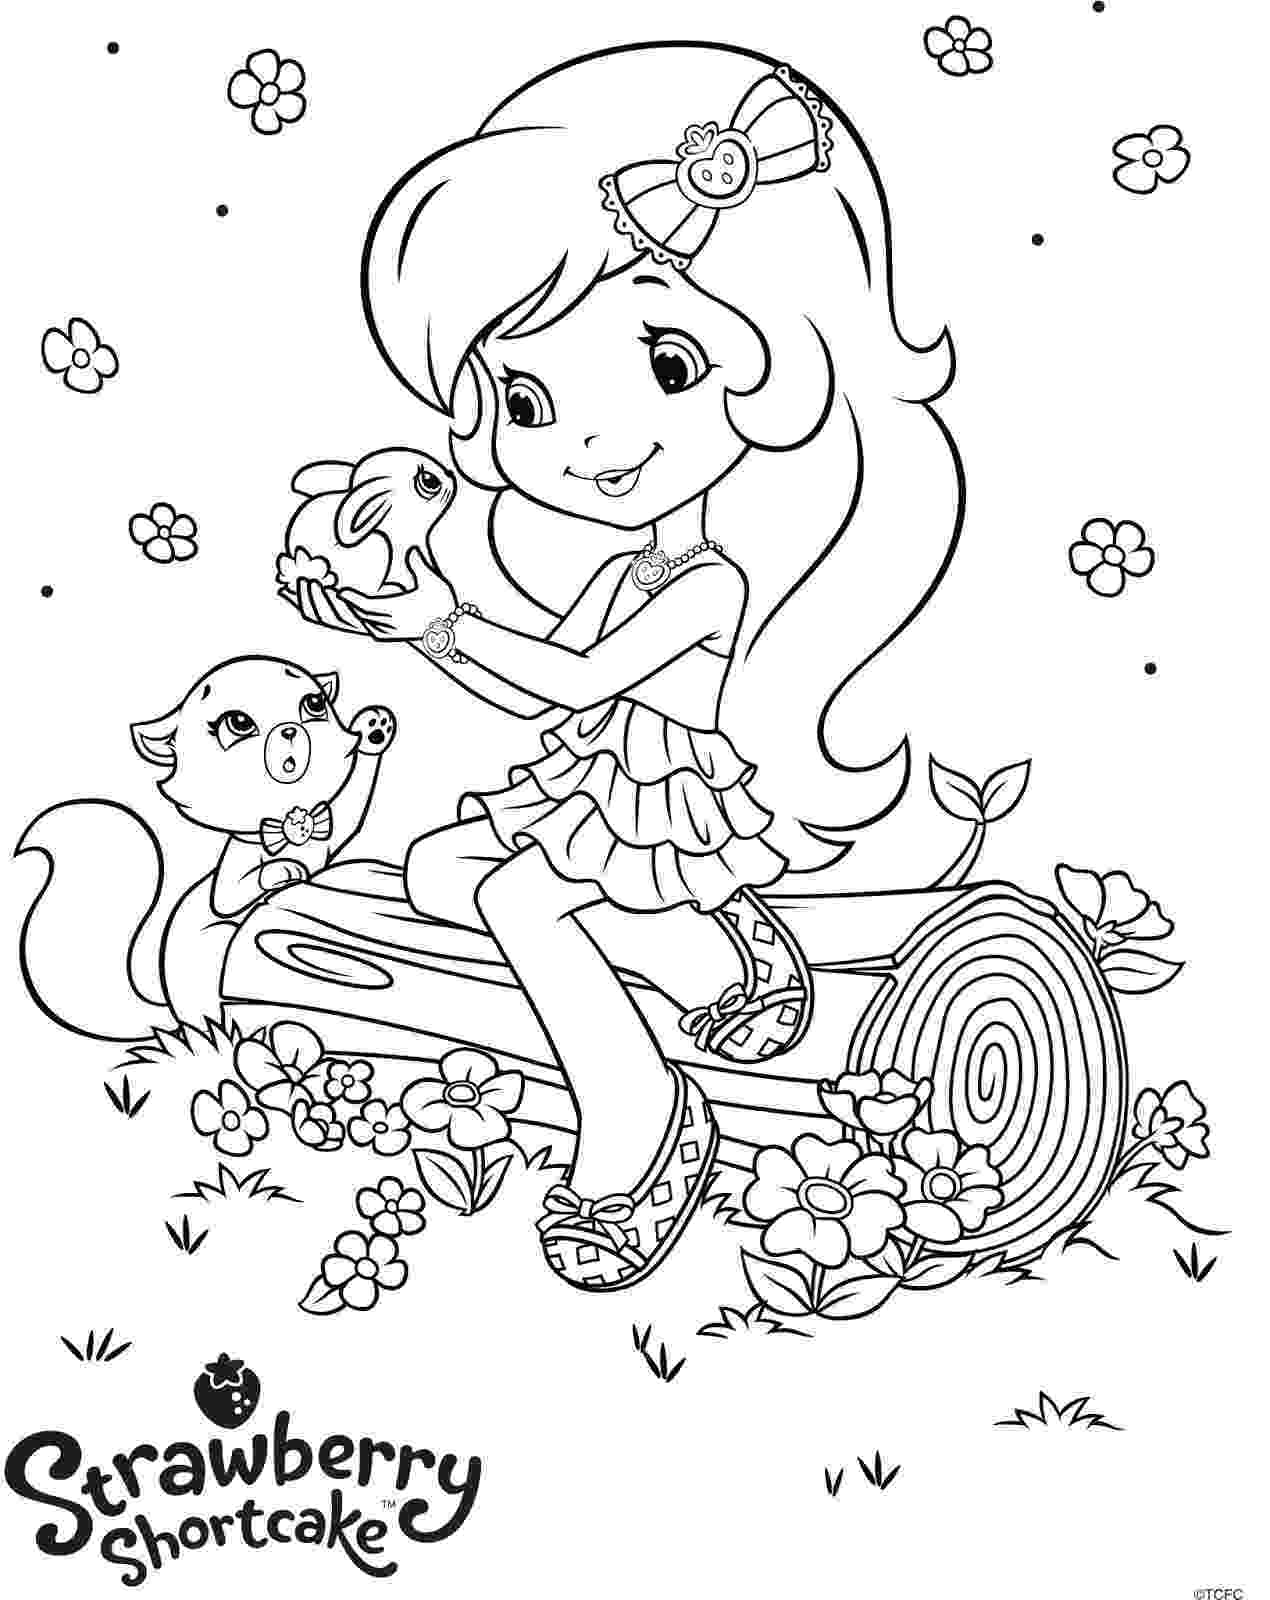 strawberry shortcake and friends coloring pages 55 coloring pages of strawberry shortcake and friends new strawberry coloring friends shortcake and pages 